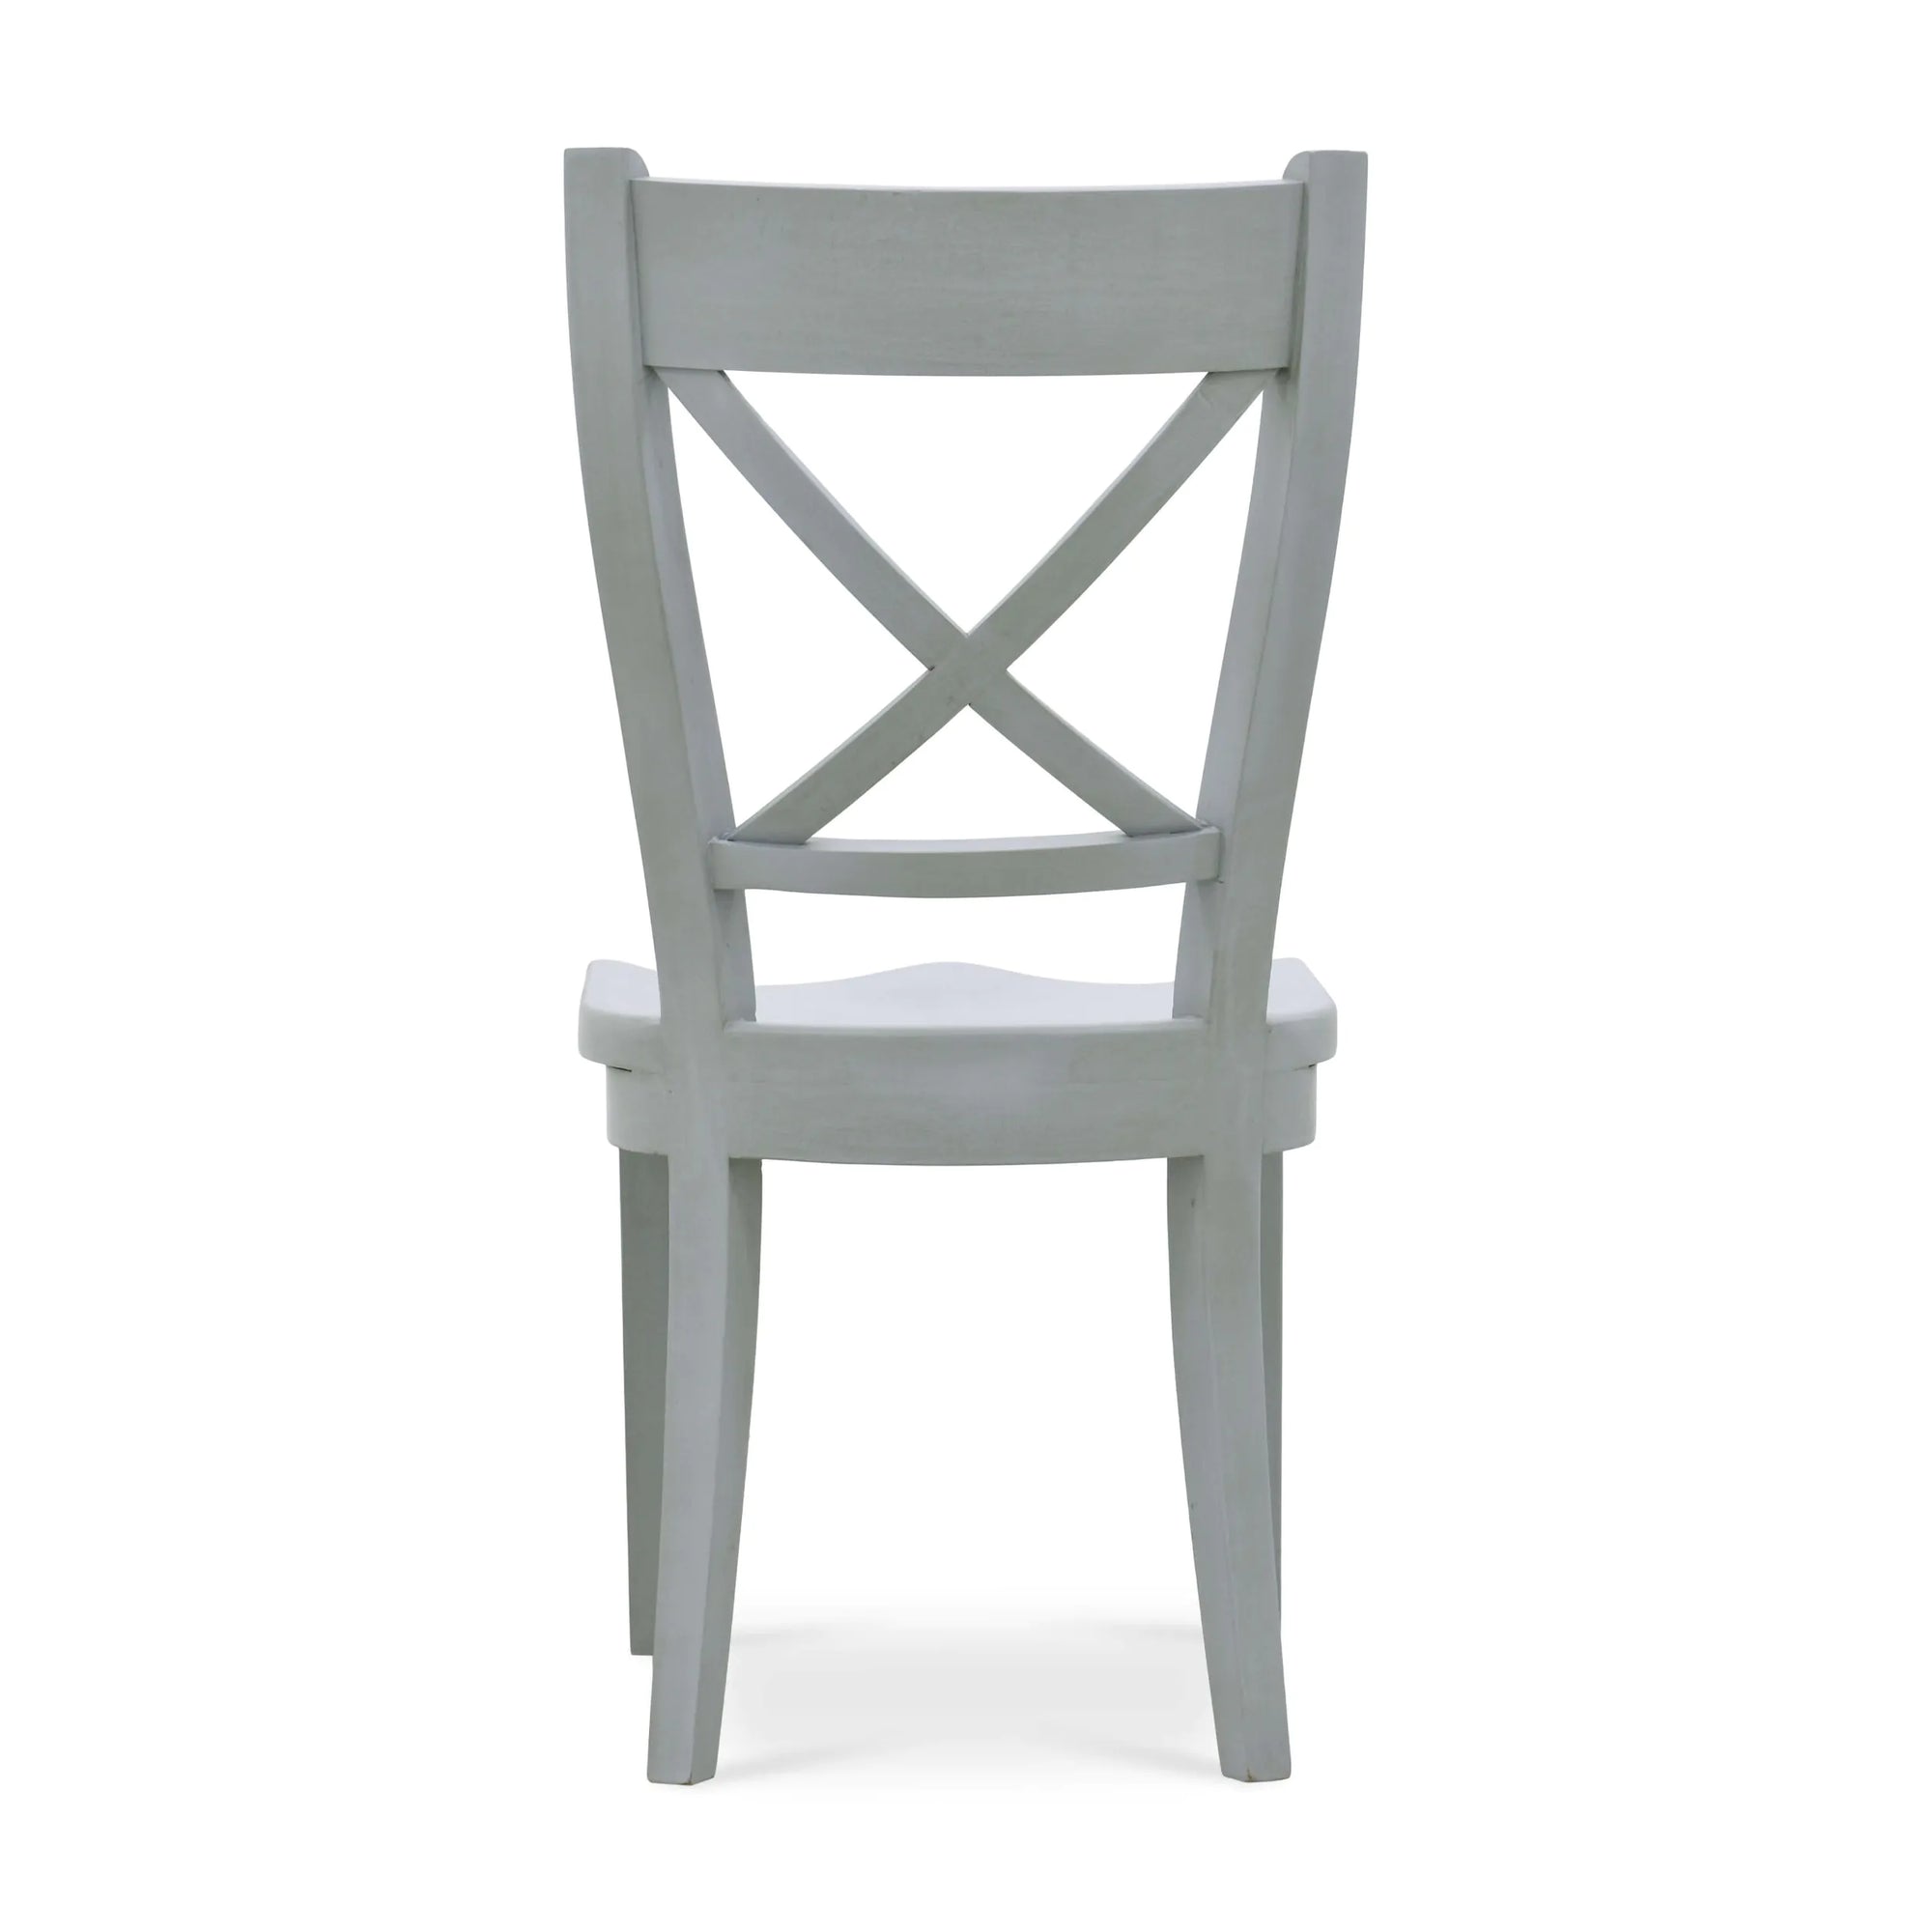 Summerset Chair Set of 4 Dining Chairs Grey Charleston rubbed distress